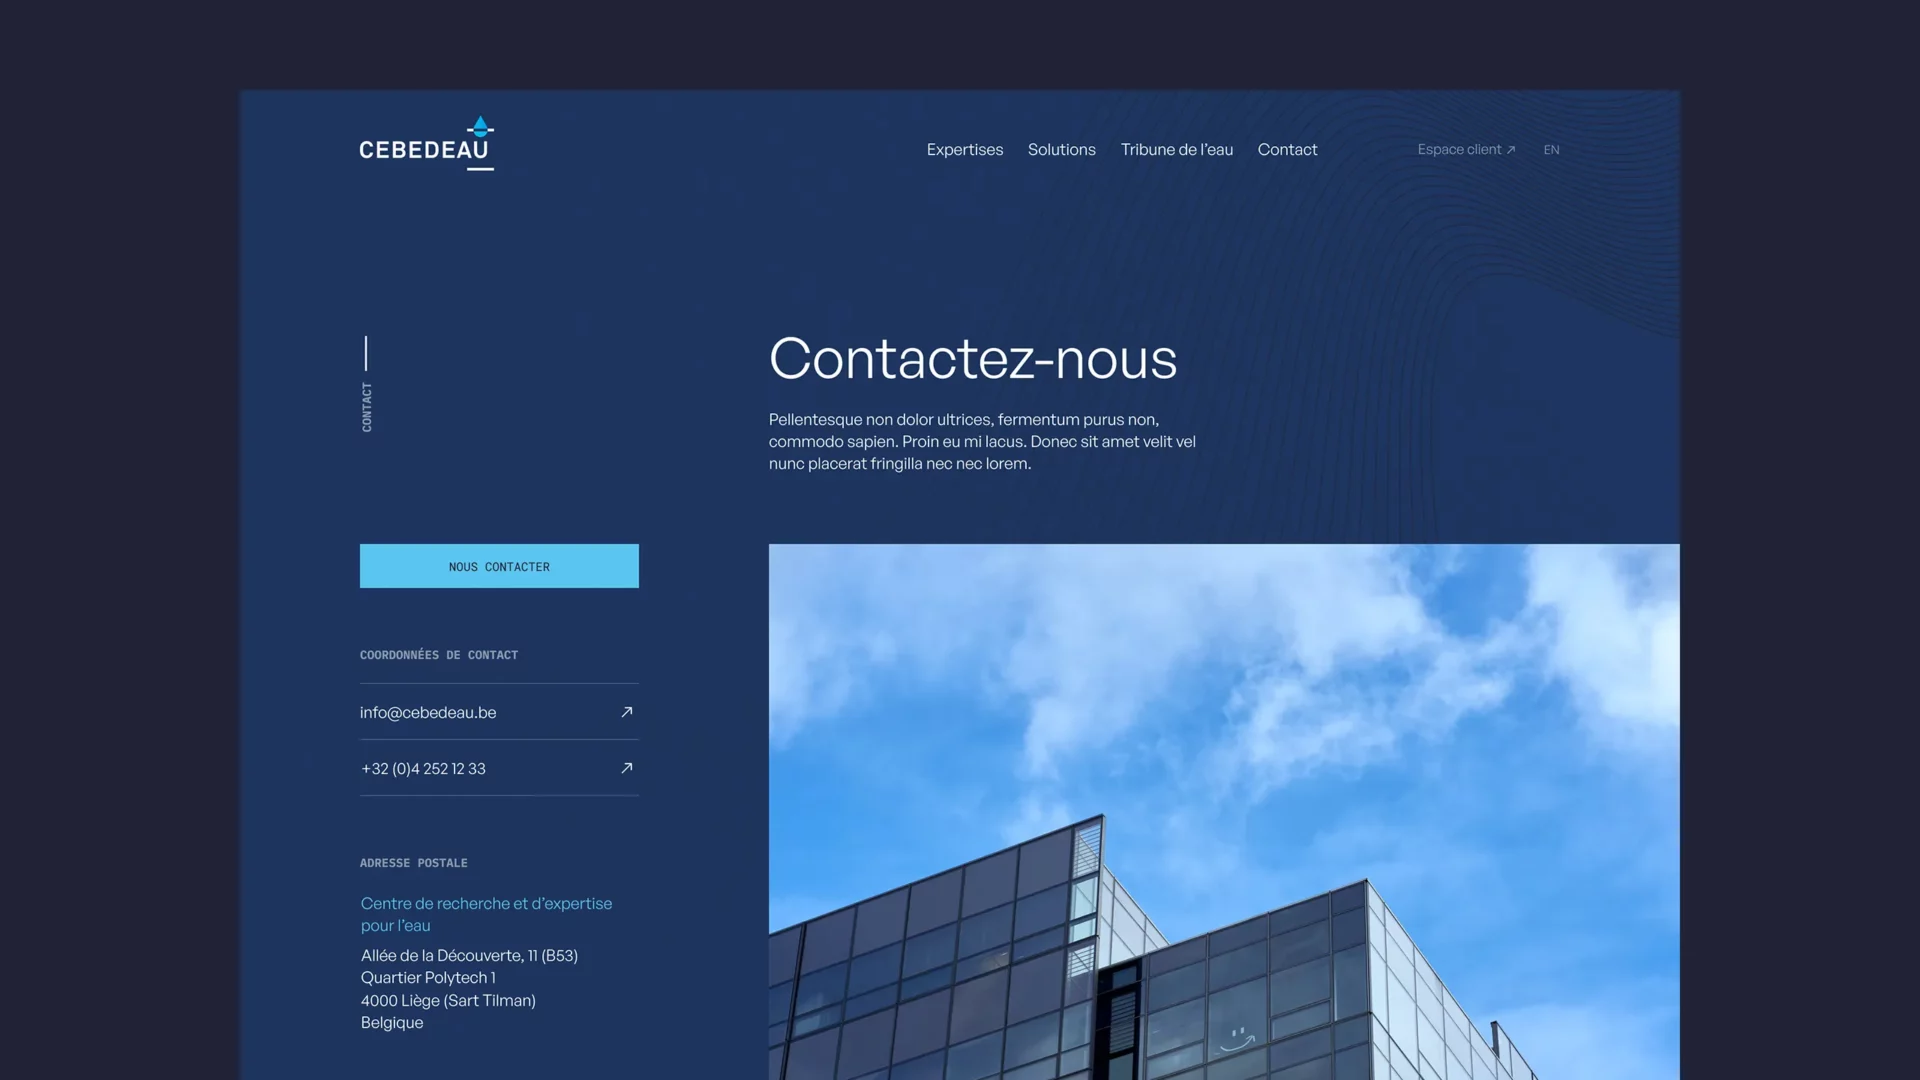 Cebedeau website's contact page sitting on a dark blue background